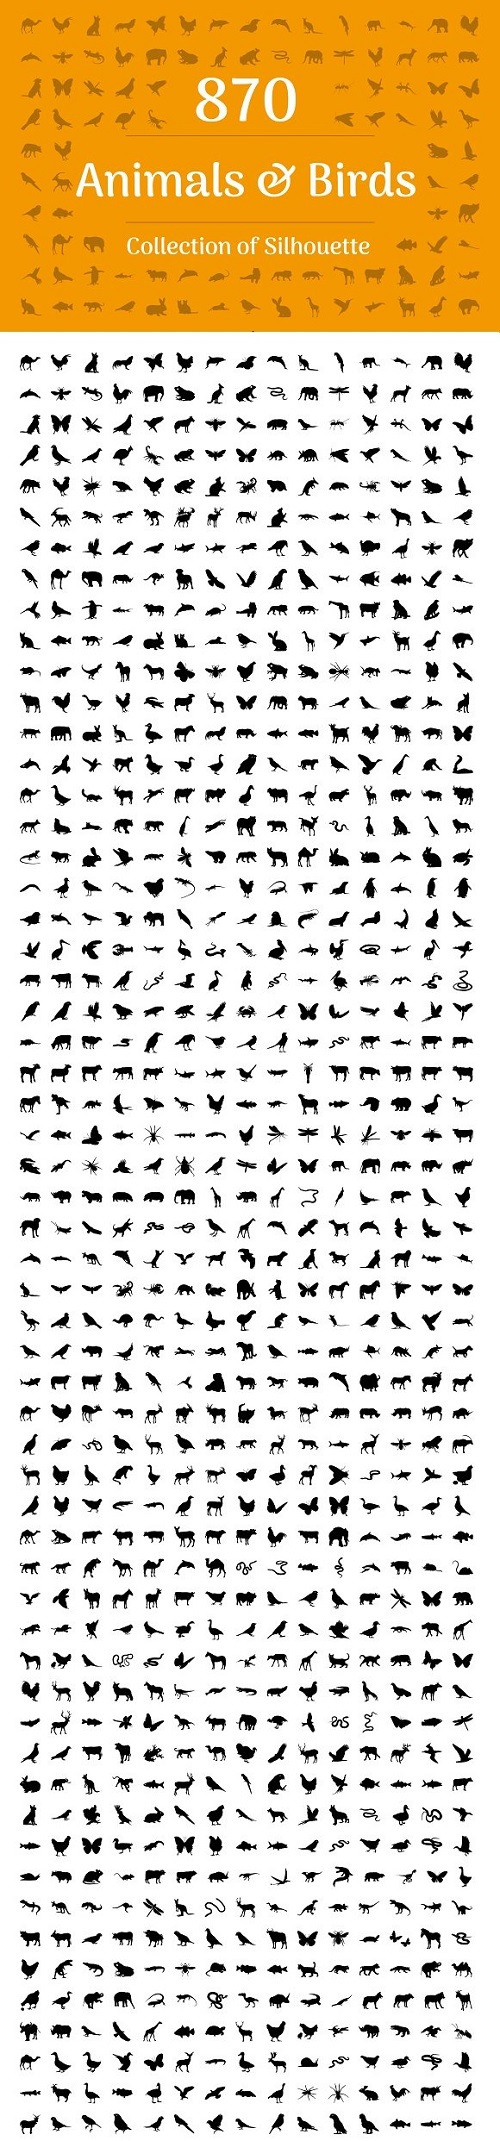 870 Animals and Birds Silhouette - 2194605